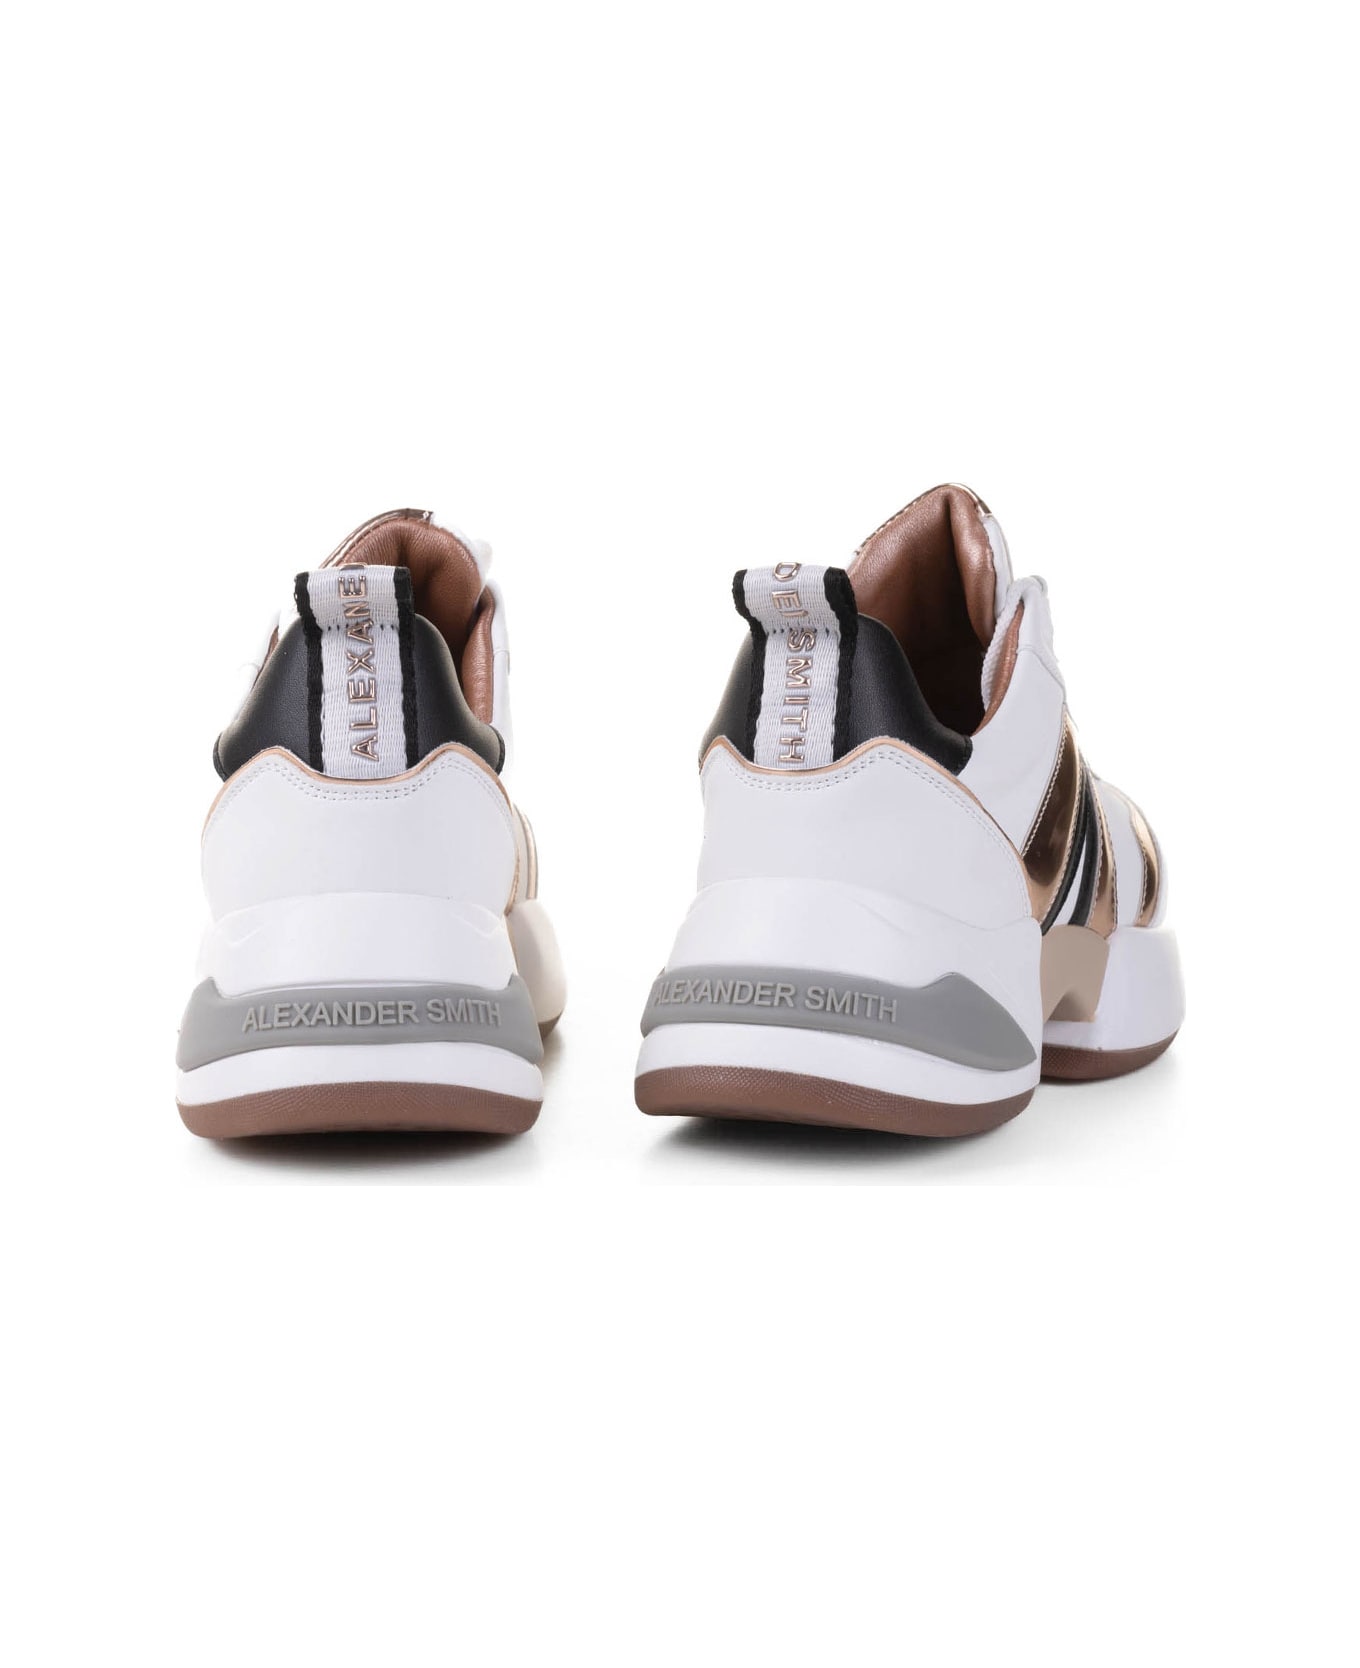 Alexander Smith London Marble Leather Sneaker - WHITE COPPER